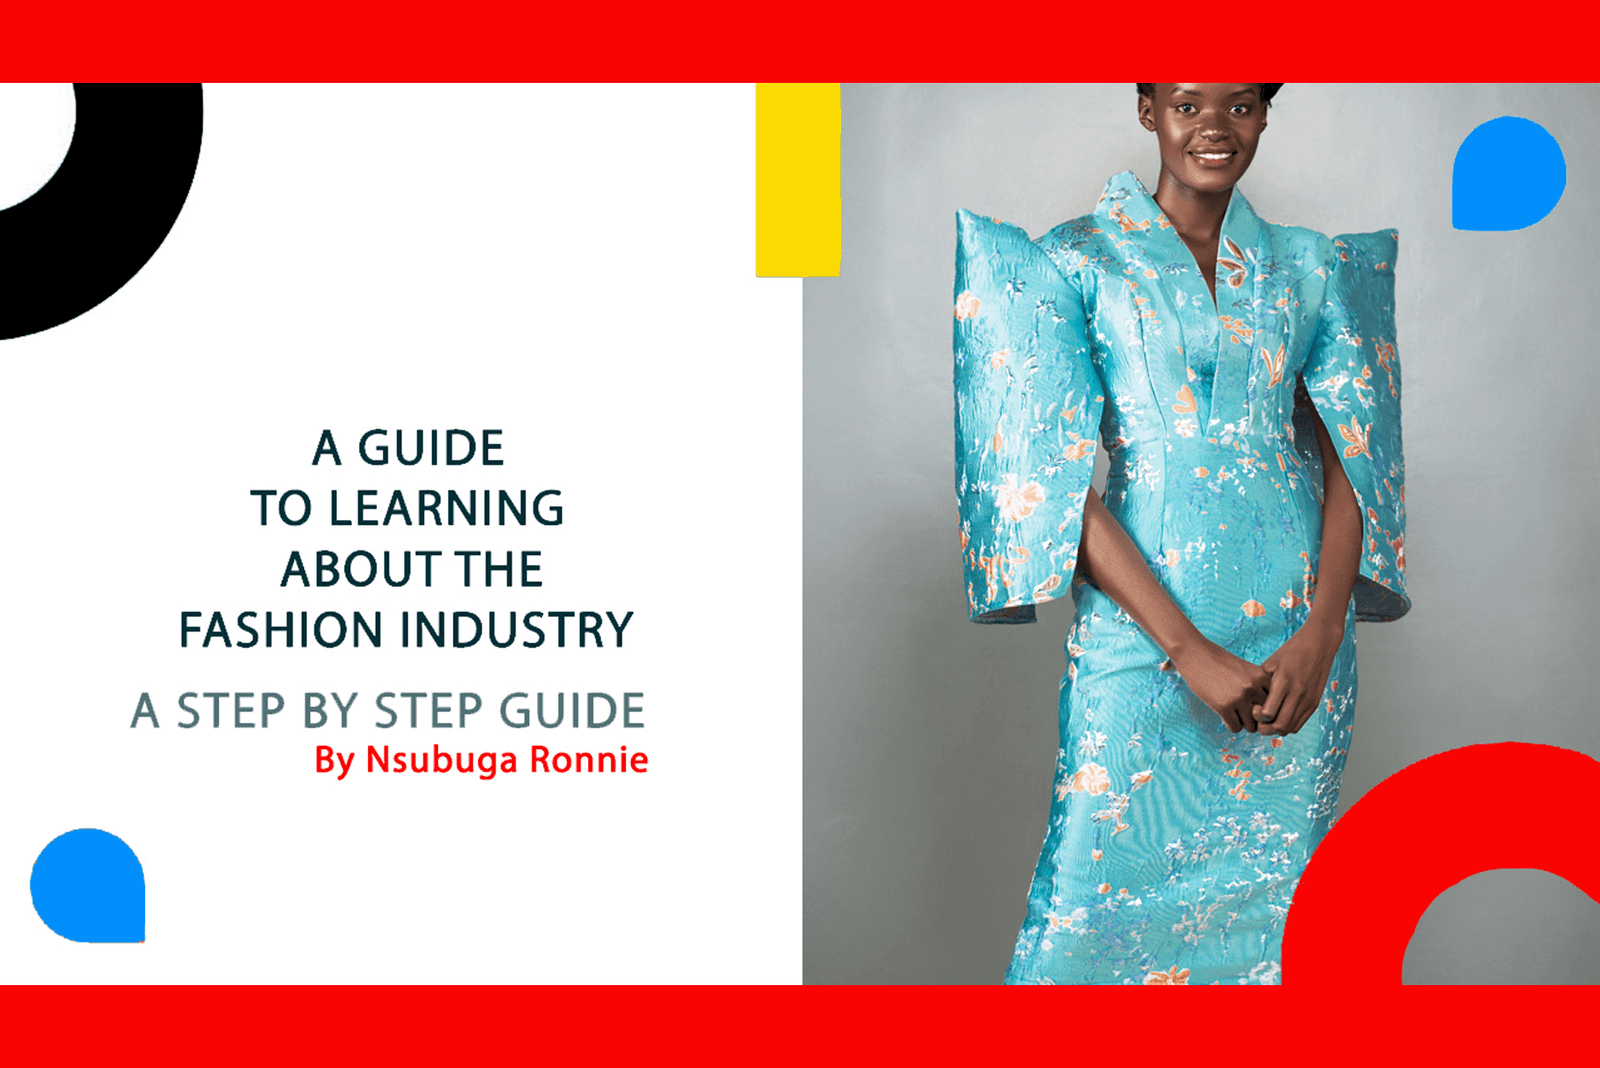 A STEP-BY-STEP GUIDE TO LEARNING ABOUT THE FASHION INDUSTRY by Nsubuga Ronnie